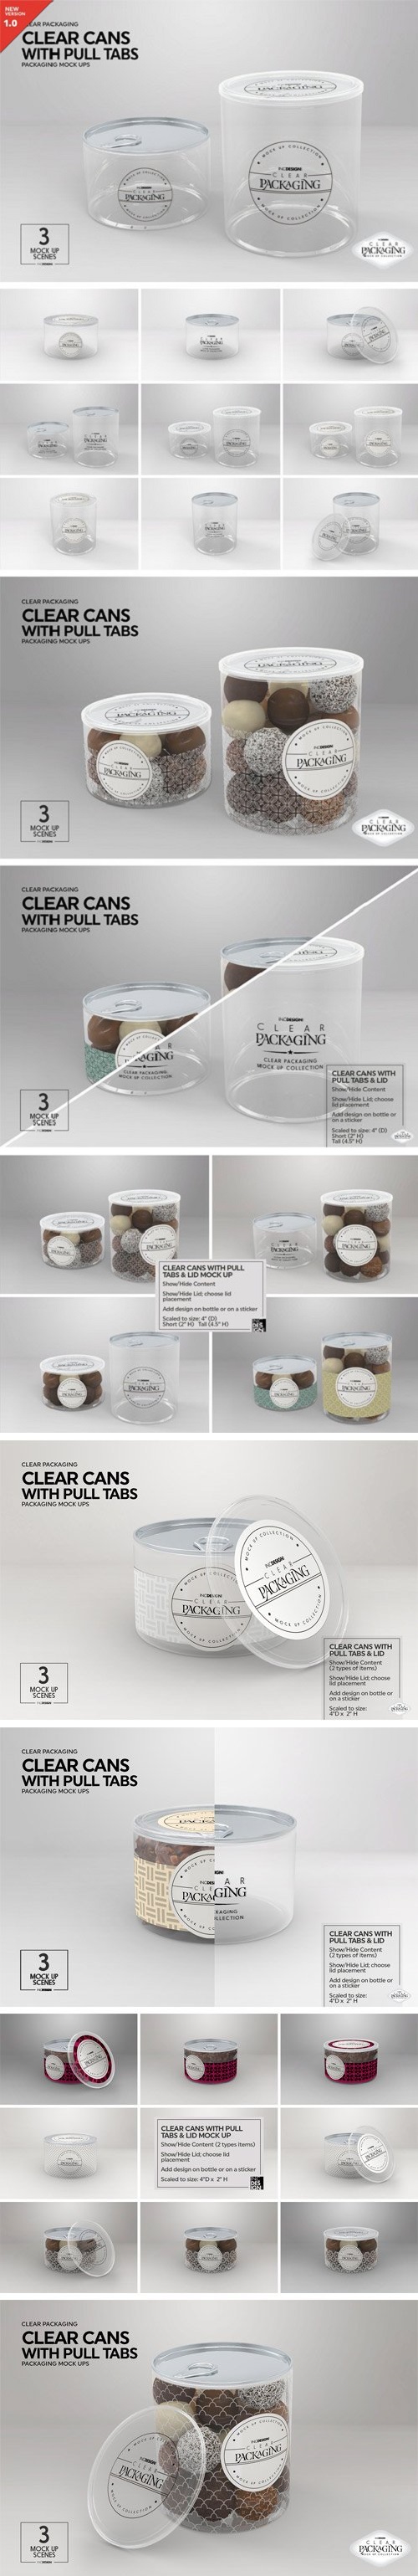 Clear Cans with Pull Tabs Mock Up - 2218686